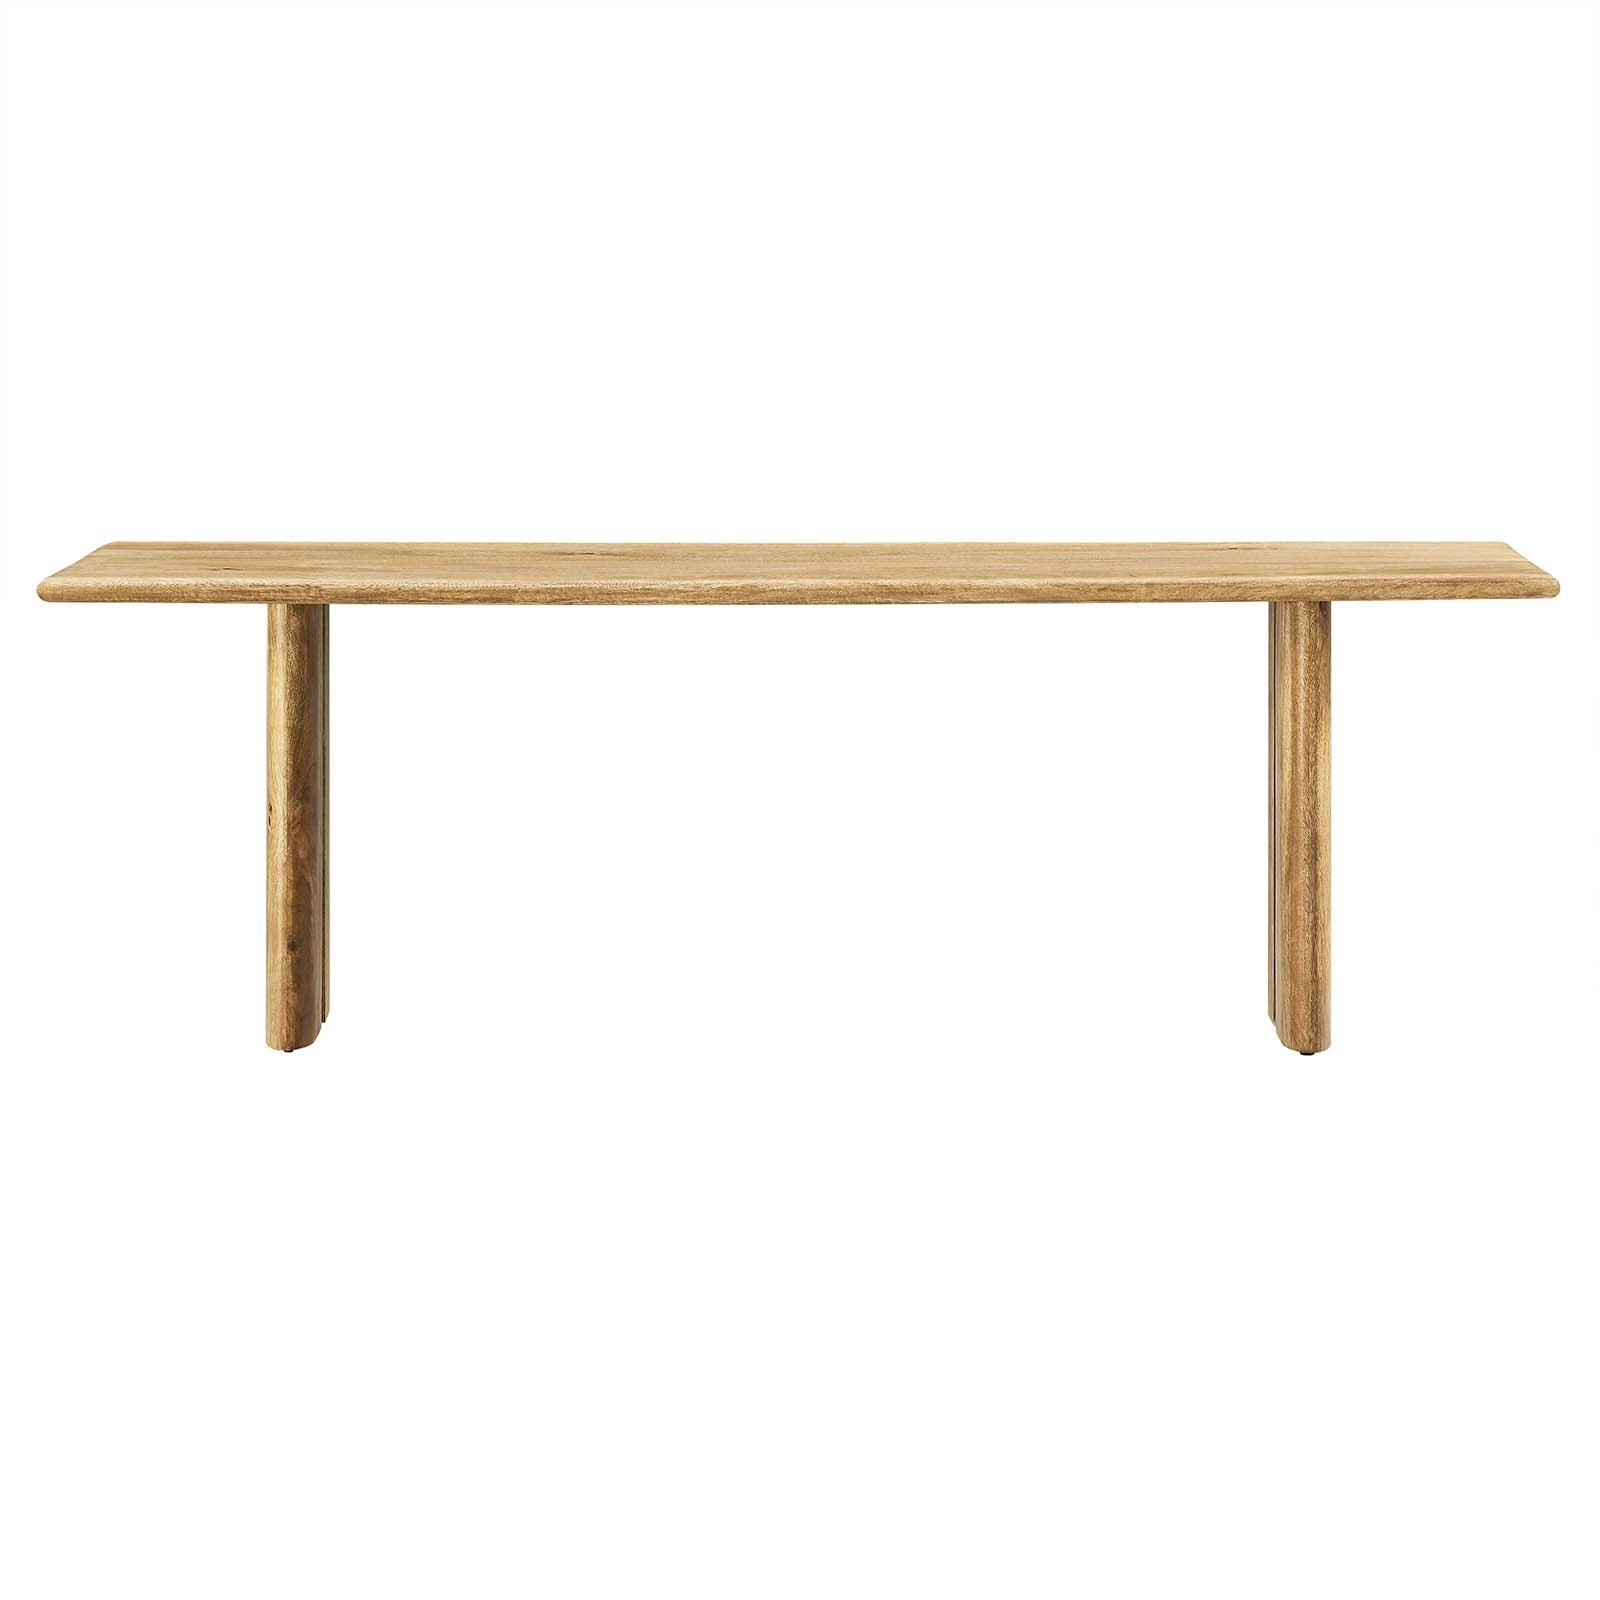 Amistad 58" Wood Bench-Bench-Modway-Wall2Wall Furnishings